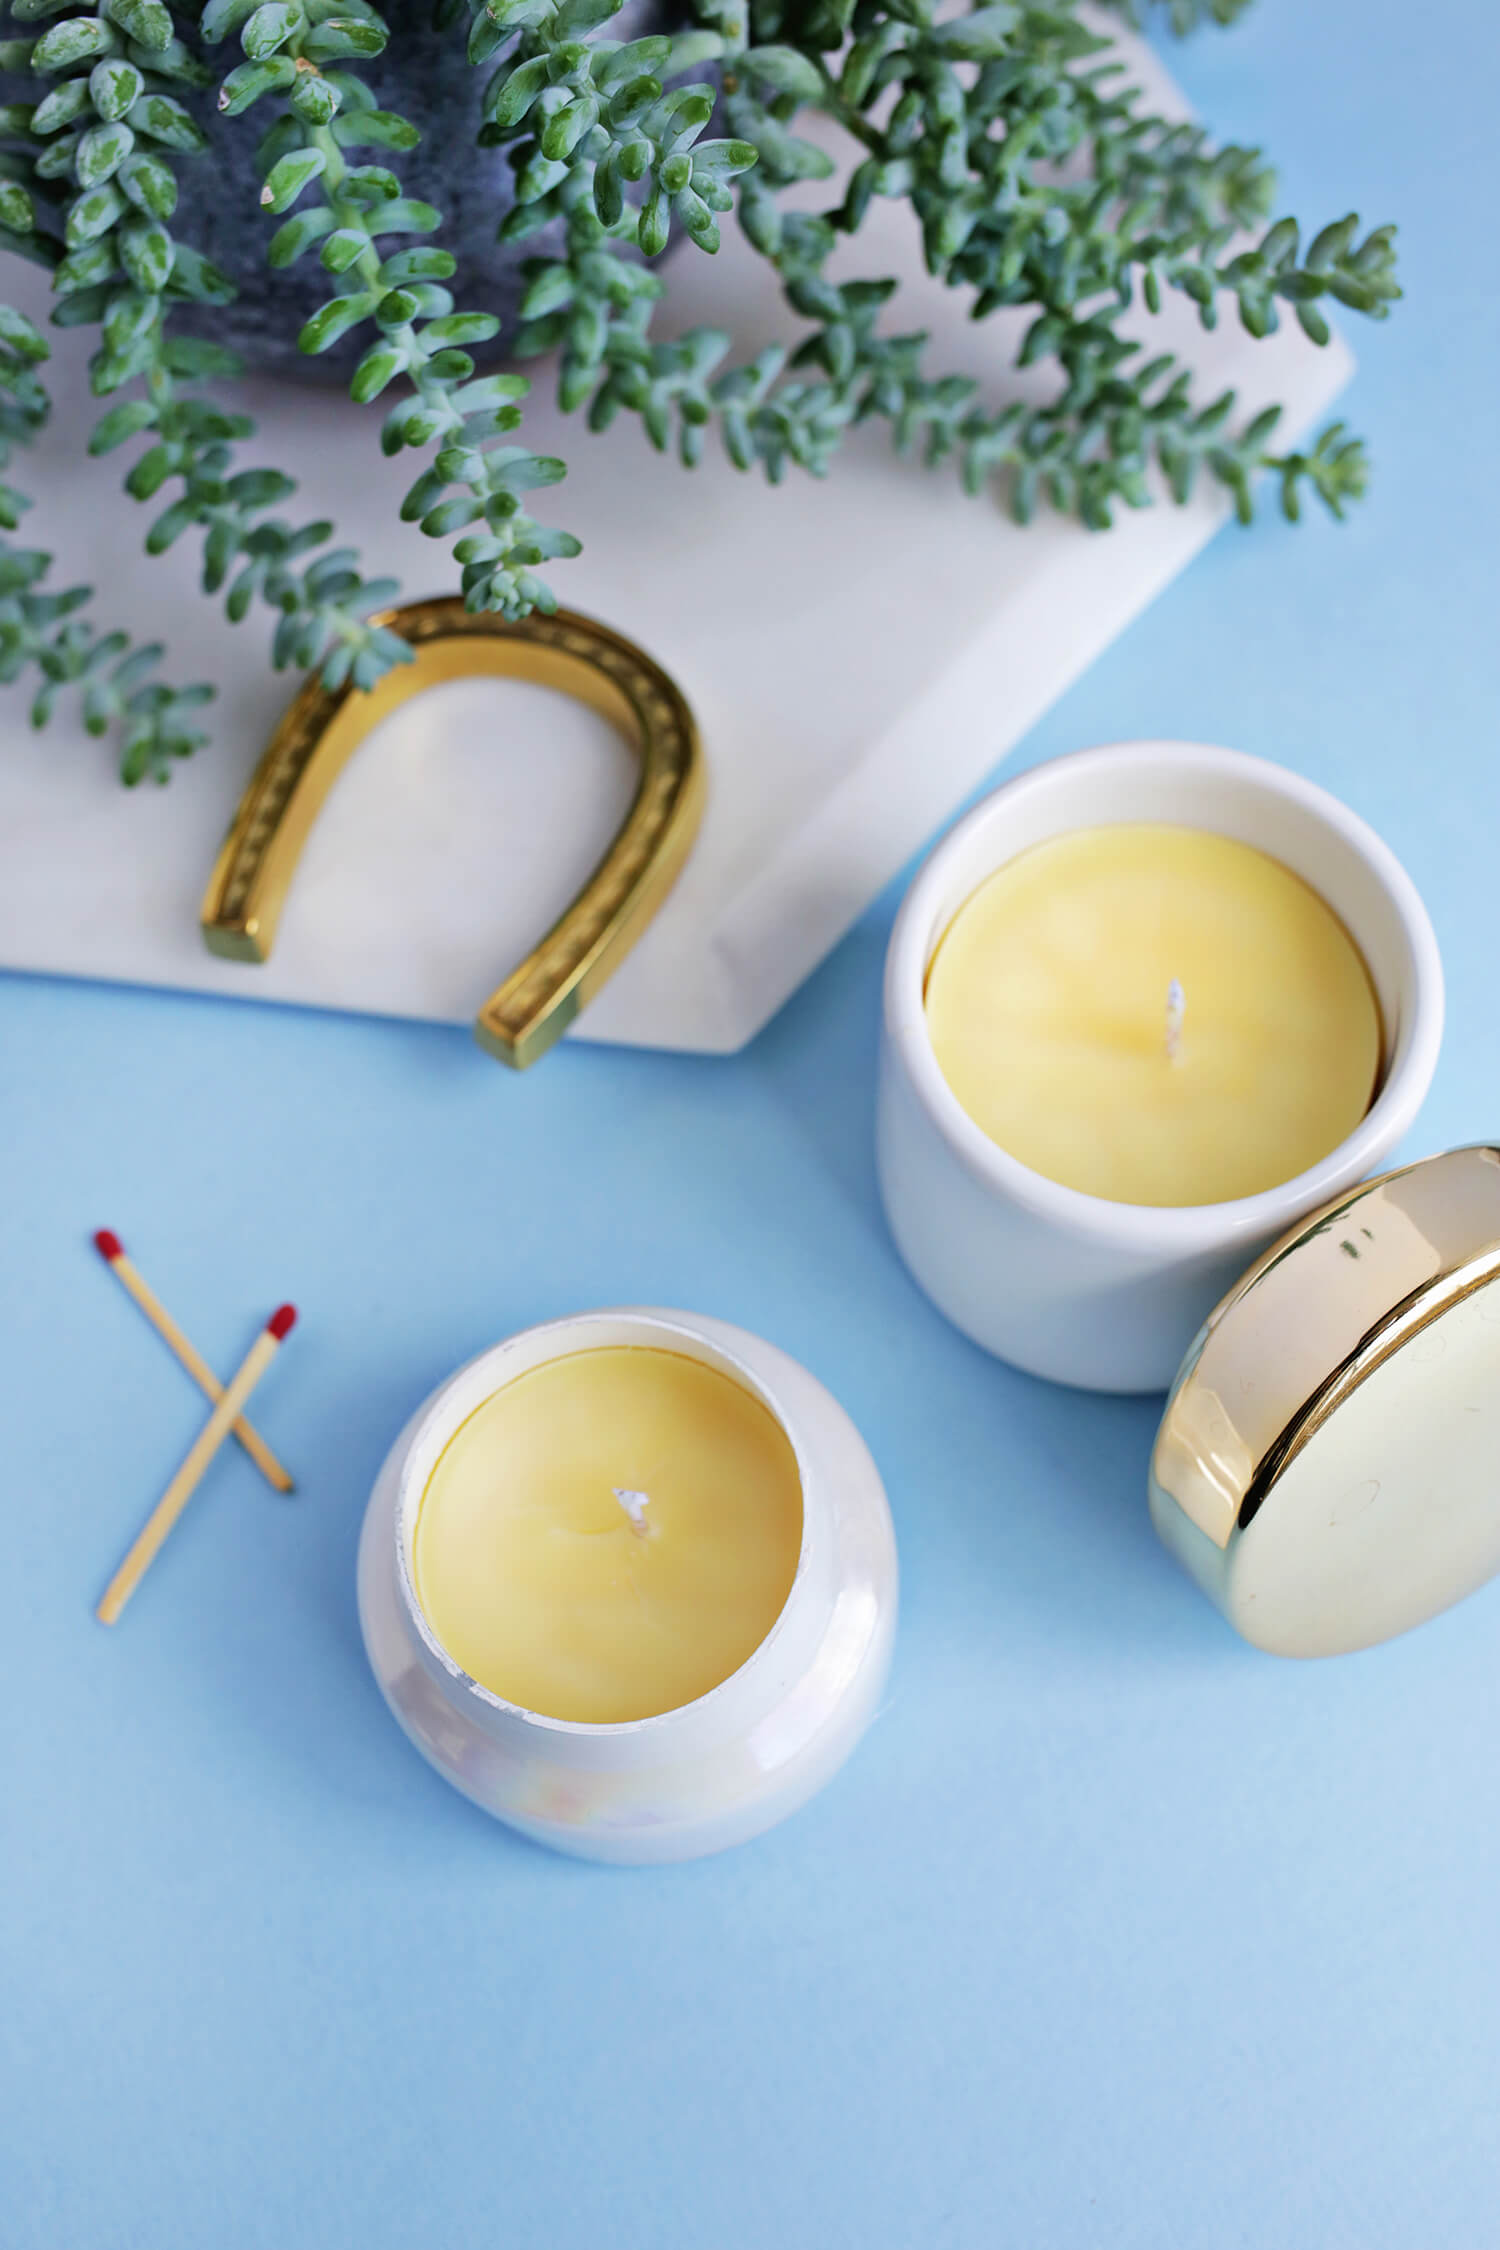 2 beeswax candles with 2 matches, a plant, and a gold horseshoe next to them